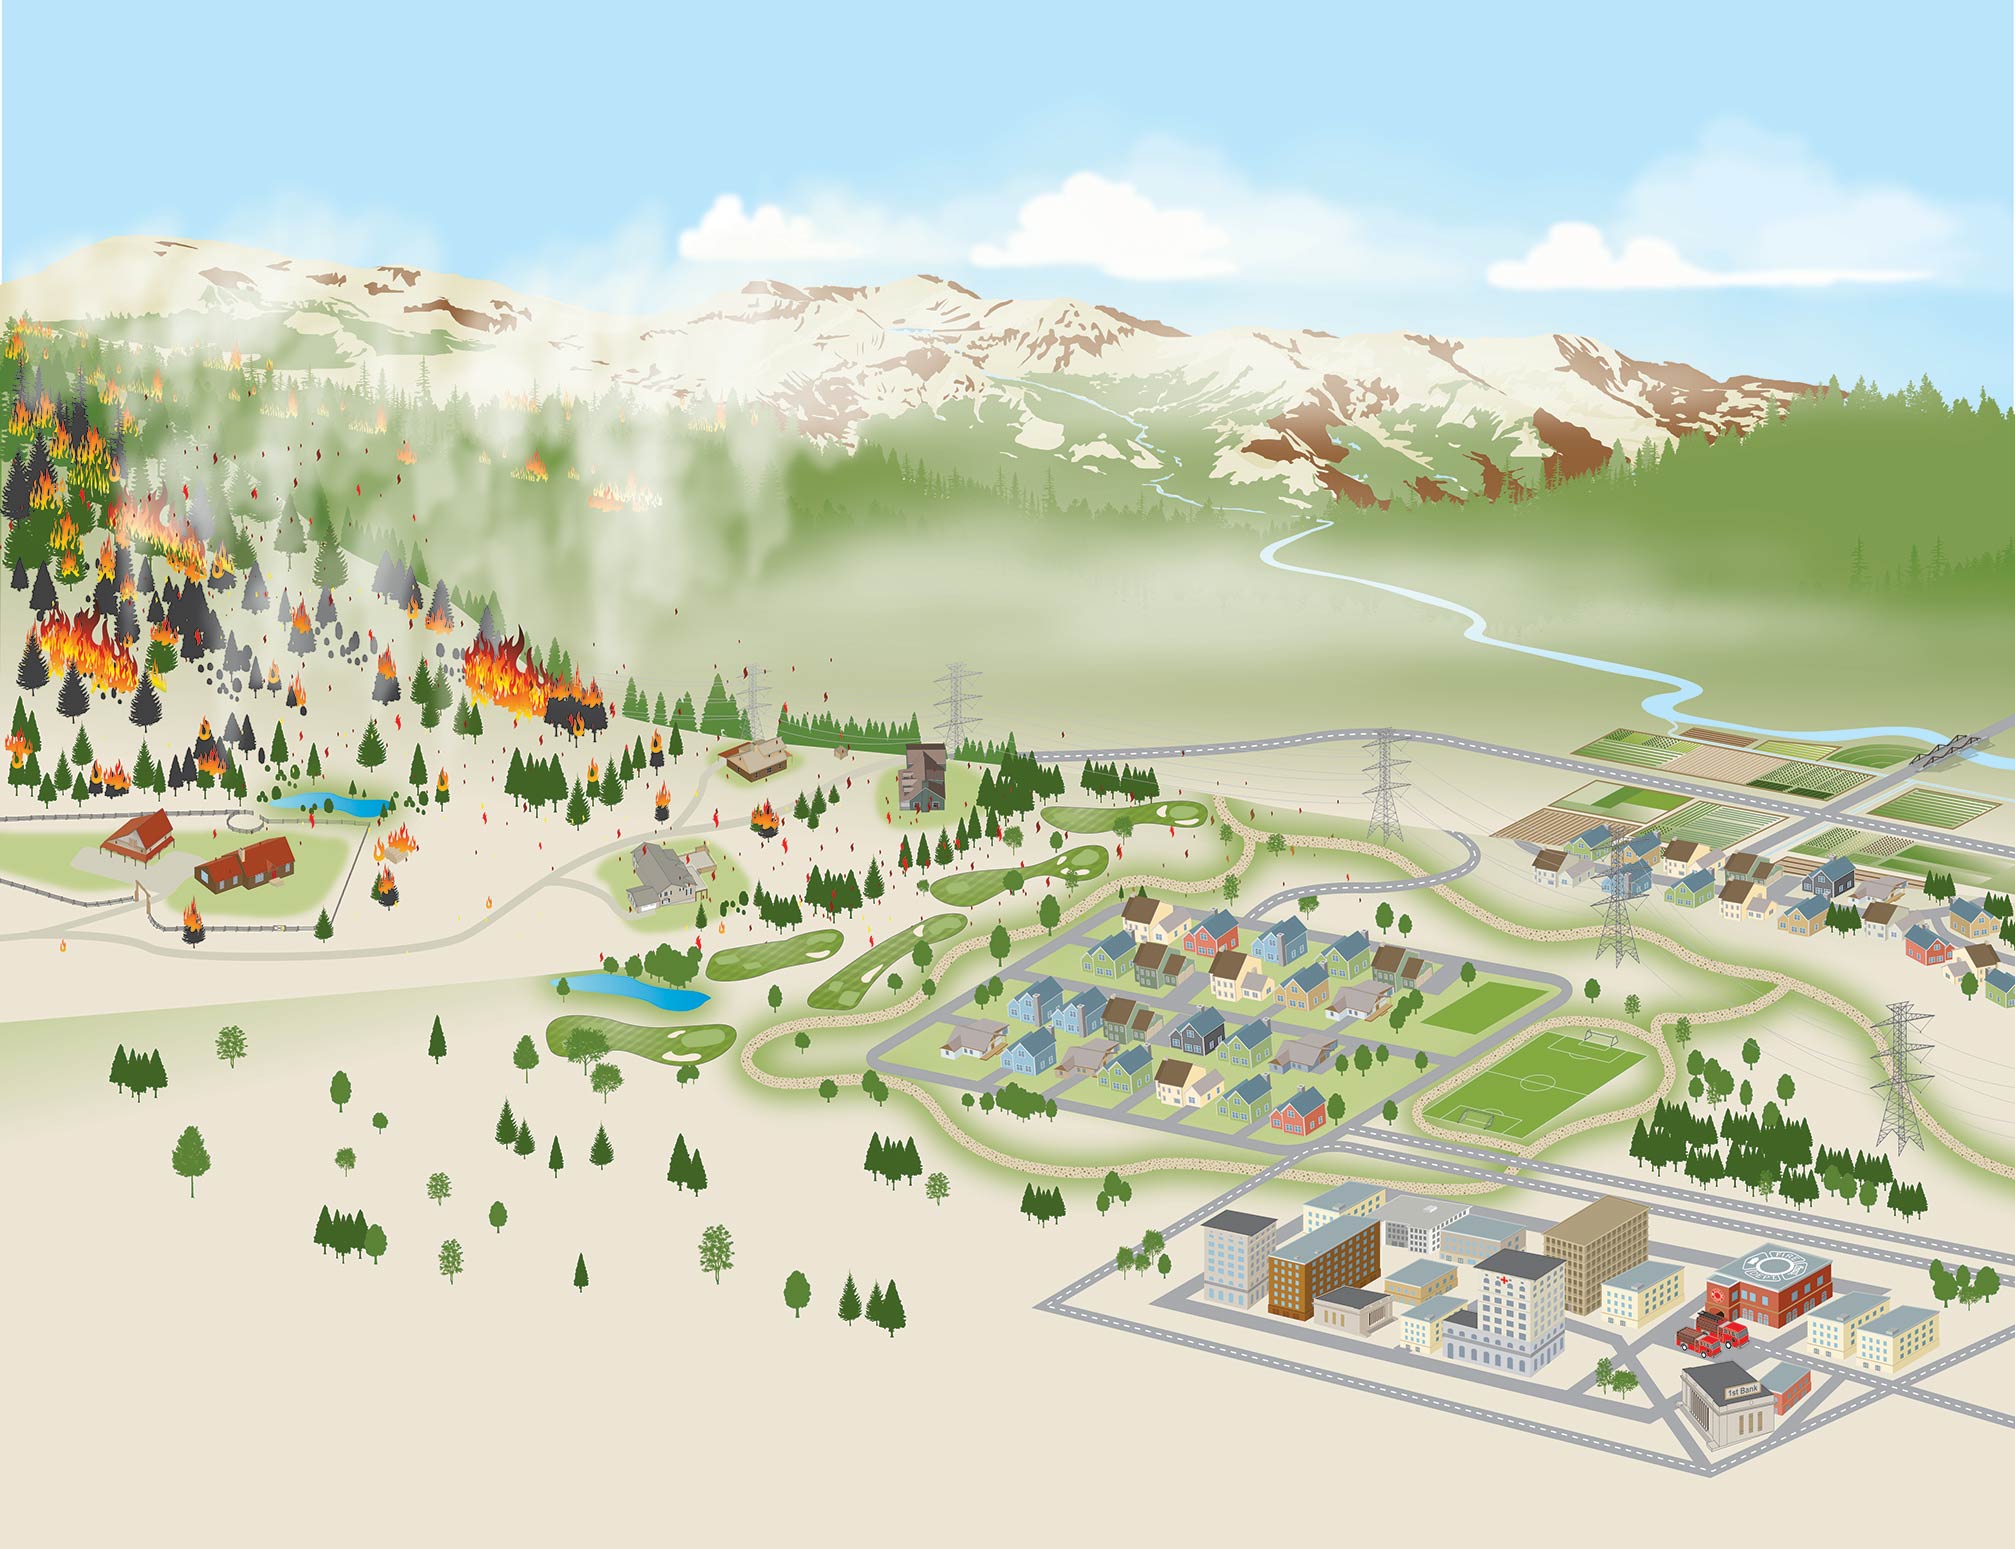 Communities utilize land use planning to reduce wildfire risks and costs